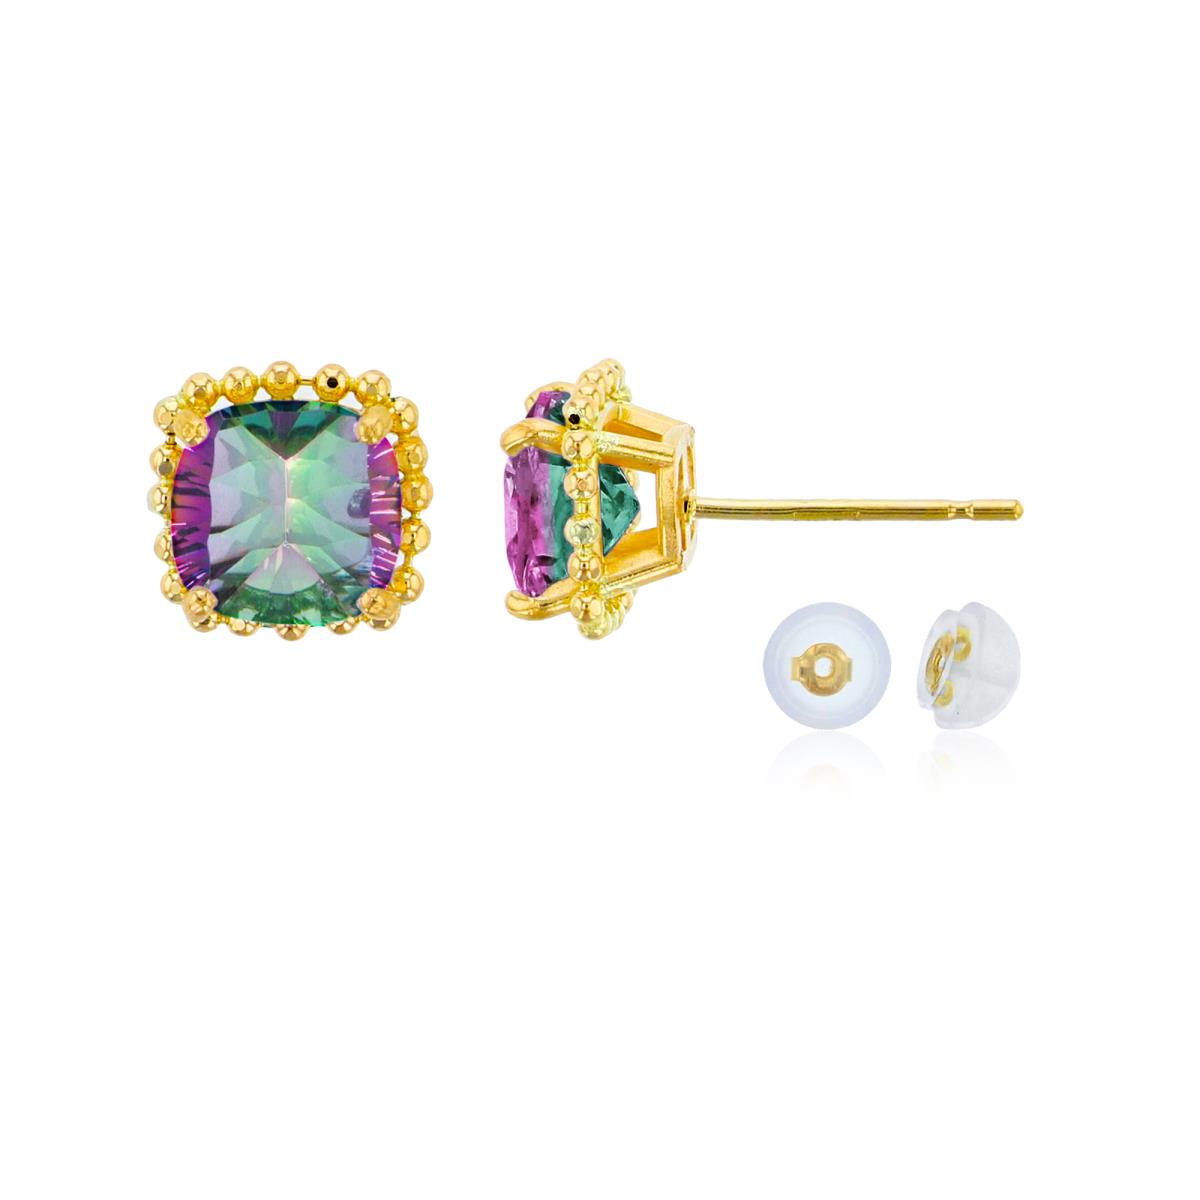 10K Yellow Gold 6x6mm Cushion Cut Mystic Green Topaz Bead Frame Stud Earring with Silicone Back